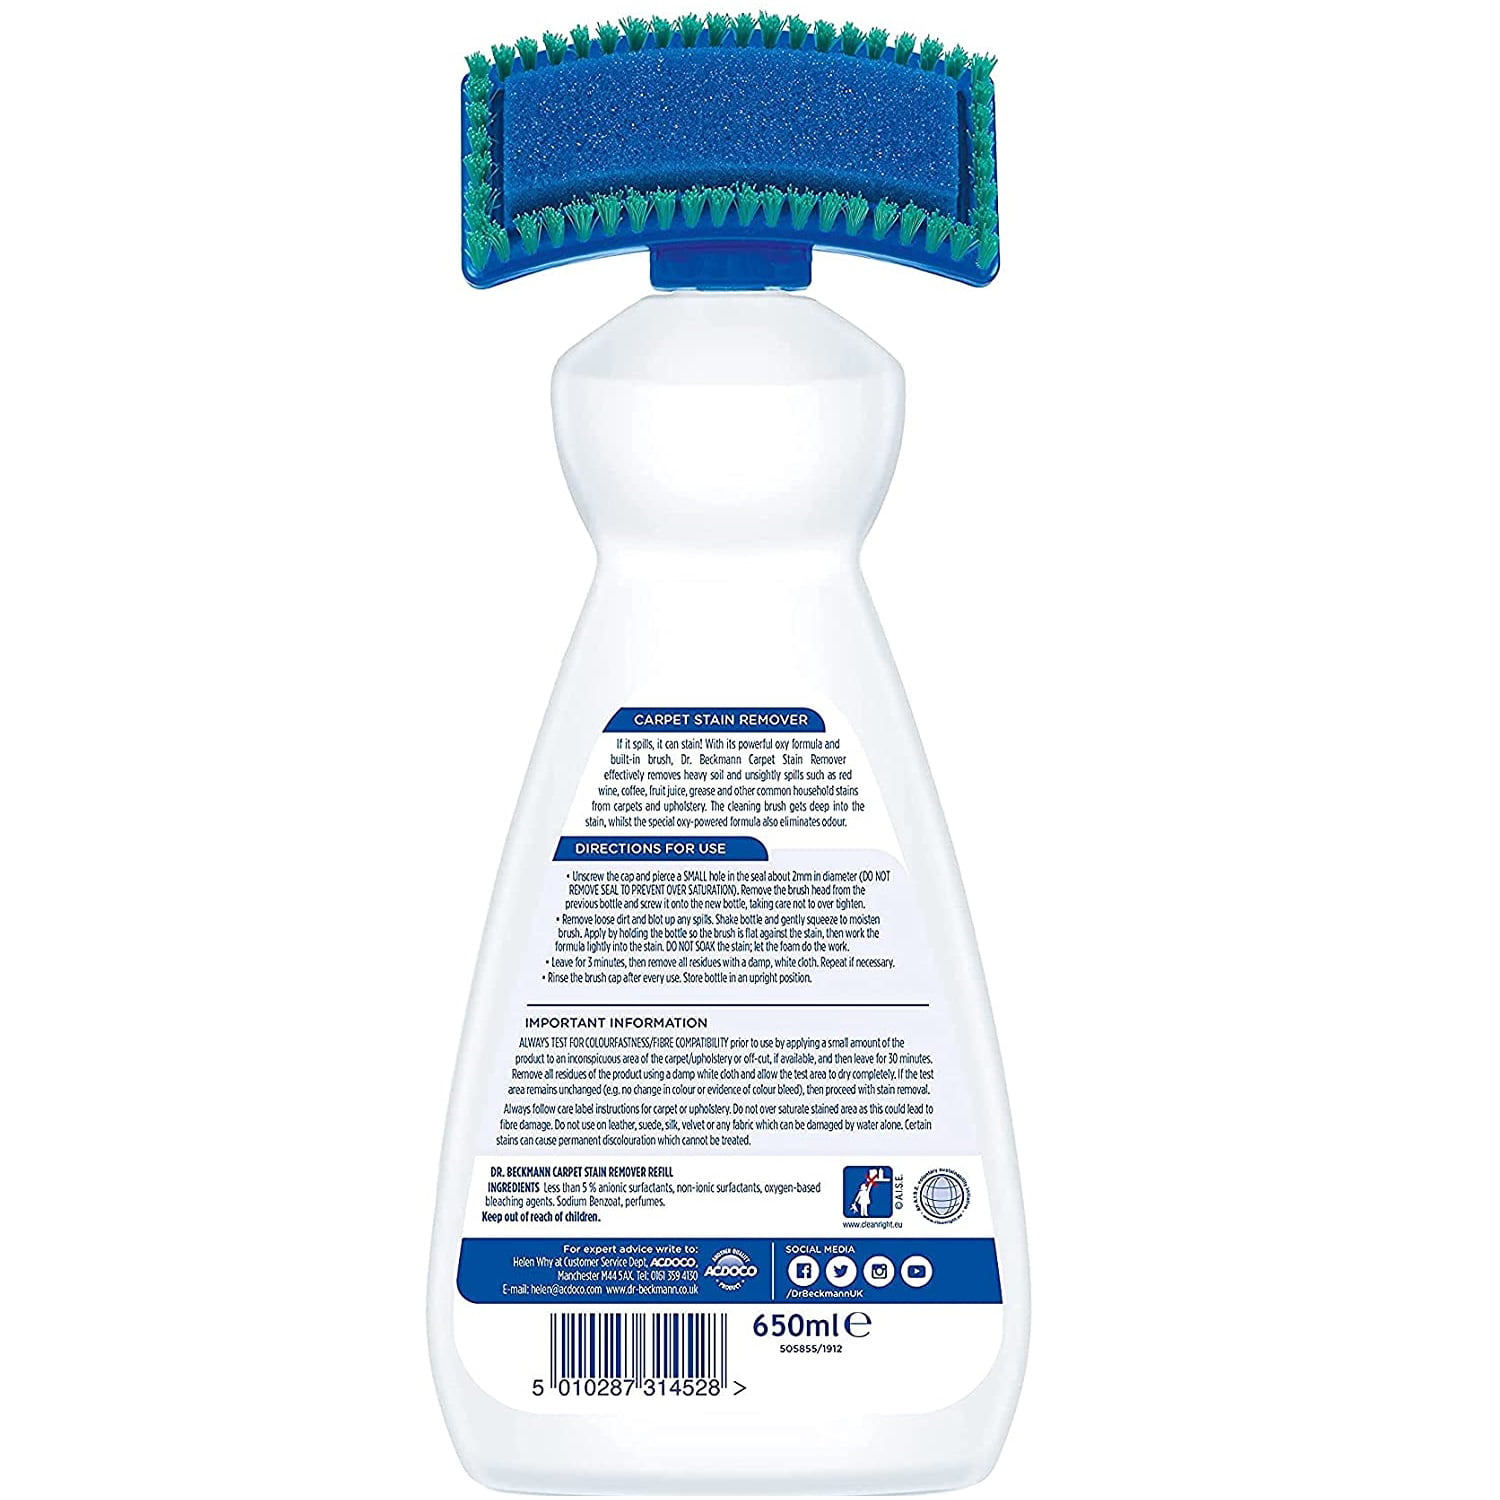 Uovertruffen melodrama Mere end noget andet Dr. Beckmann Carpet Stain remover with cleaning applicator/brush - 650ml  (Pack of 2) - Walmart.com